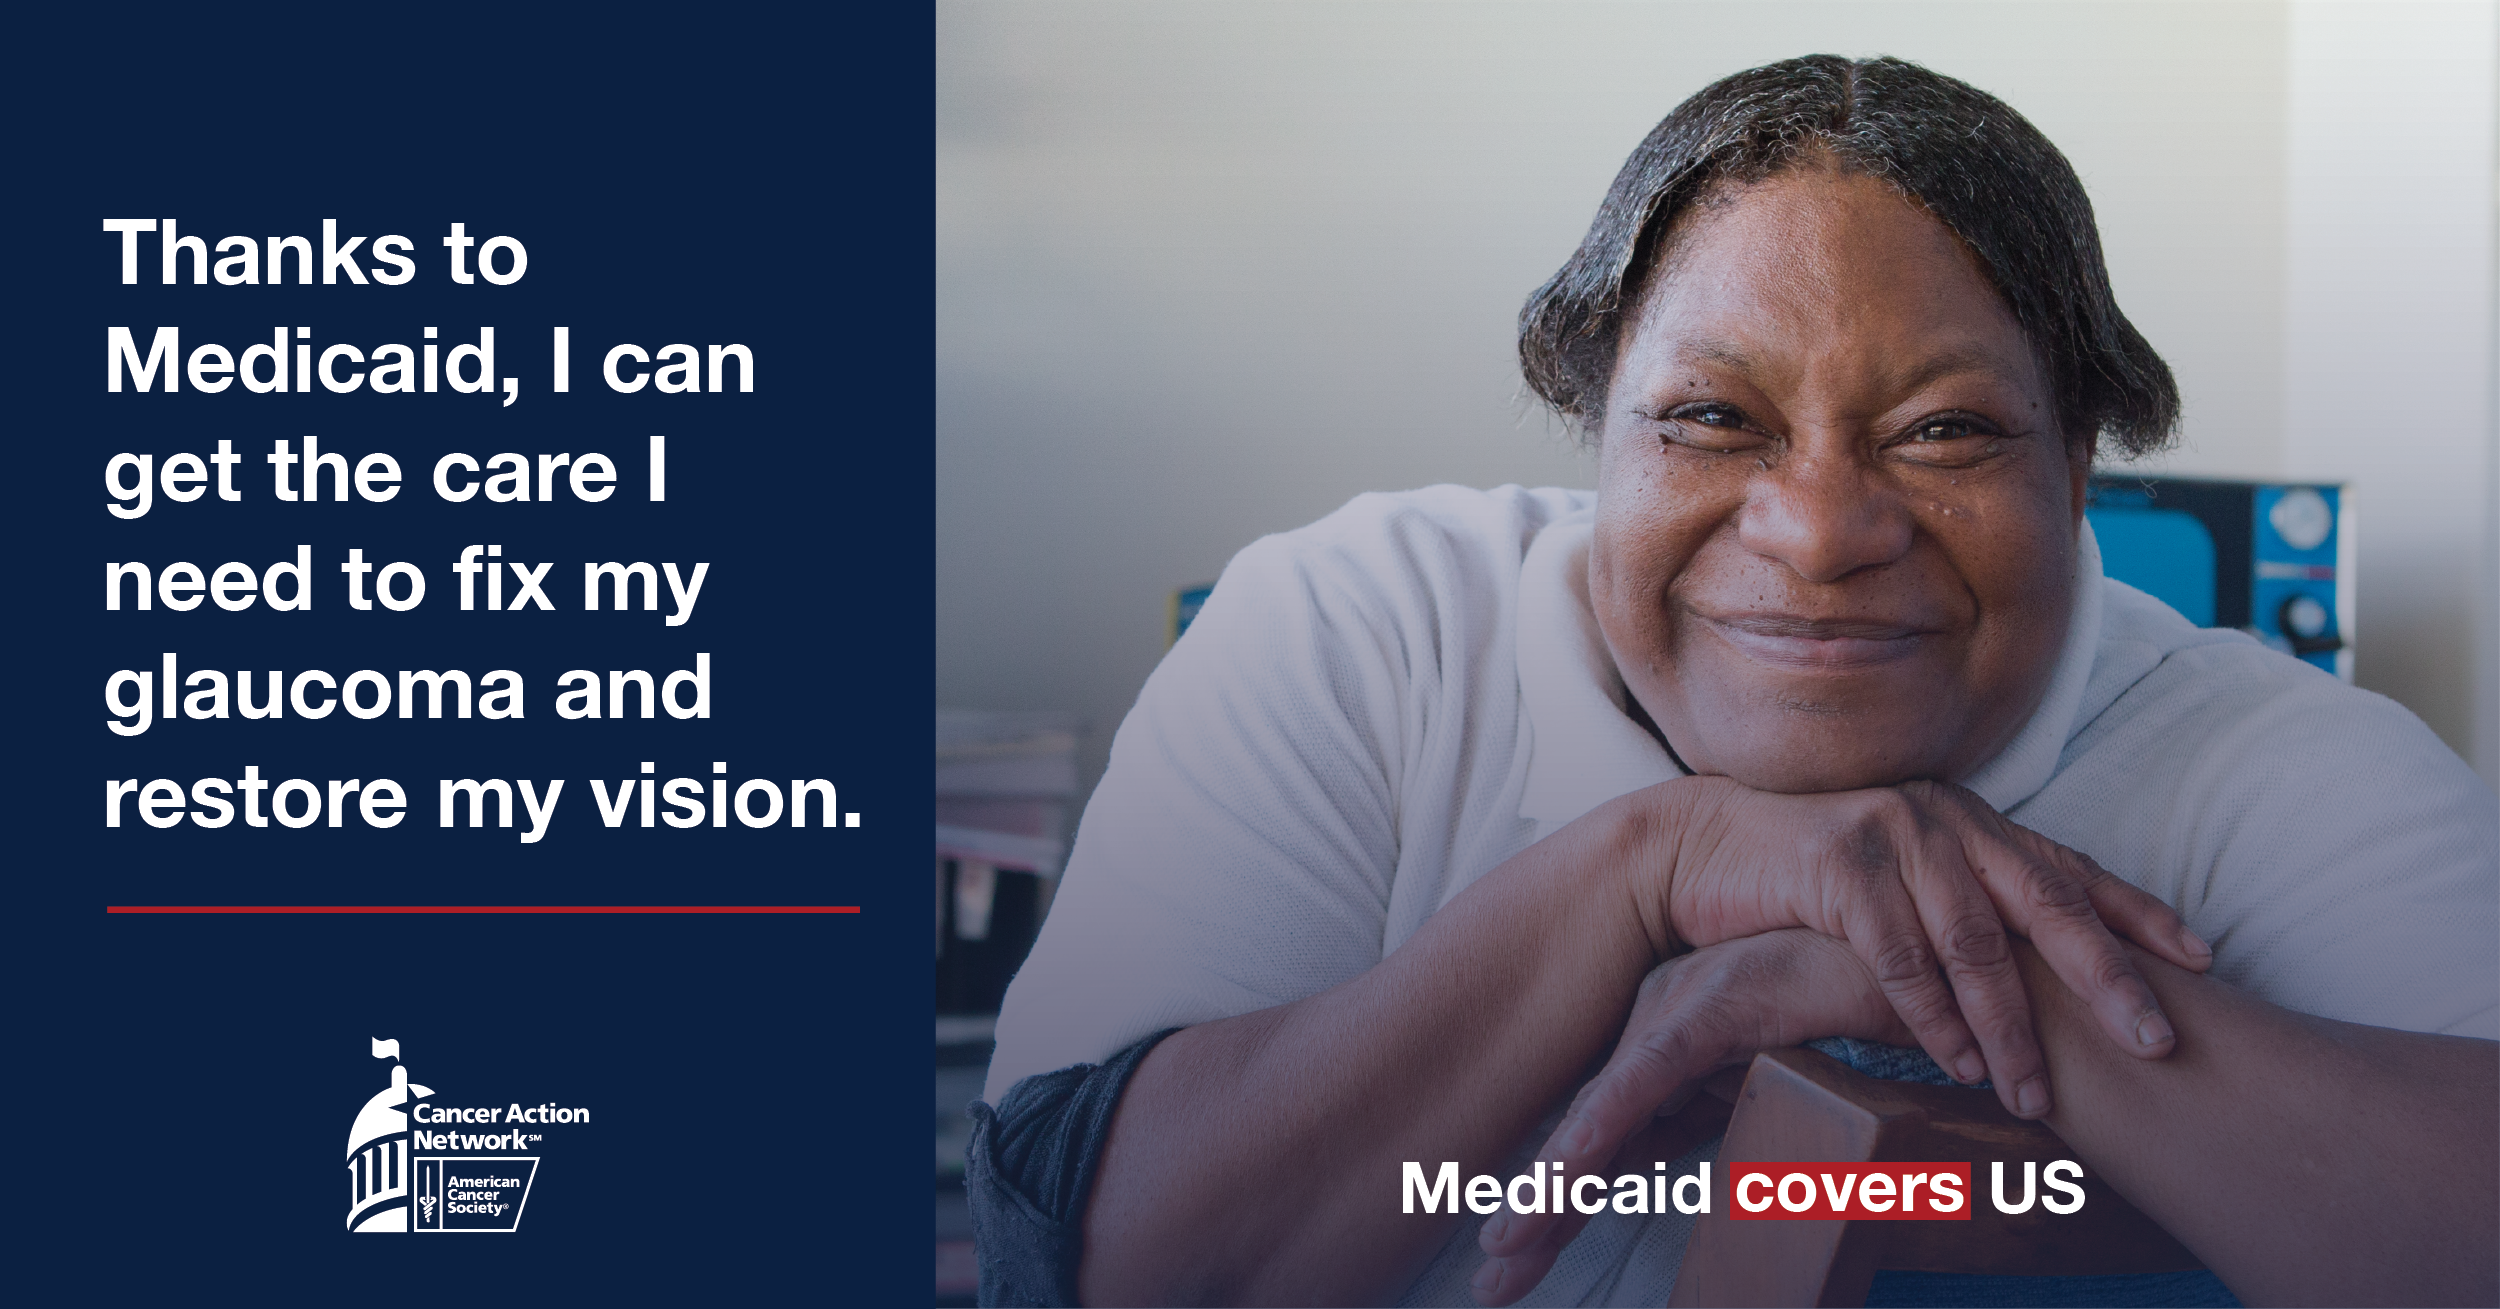 Woman talks about how she has been helped by medicaid